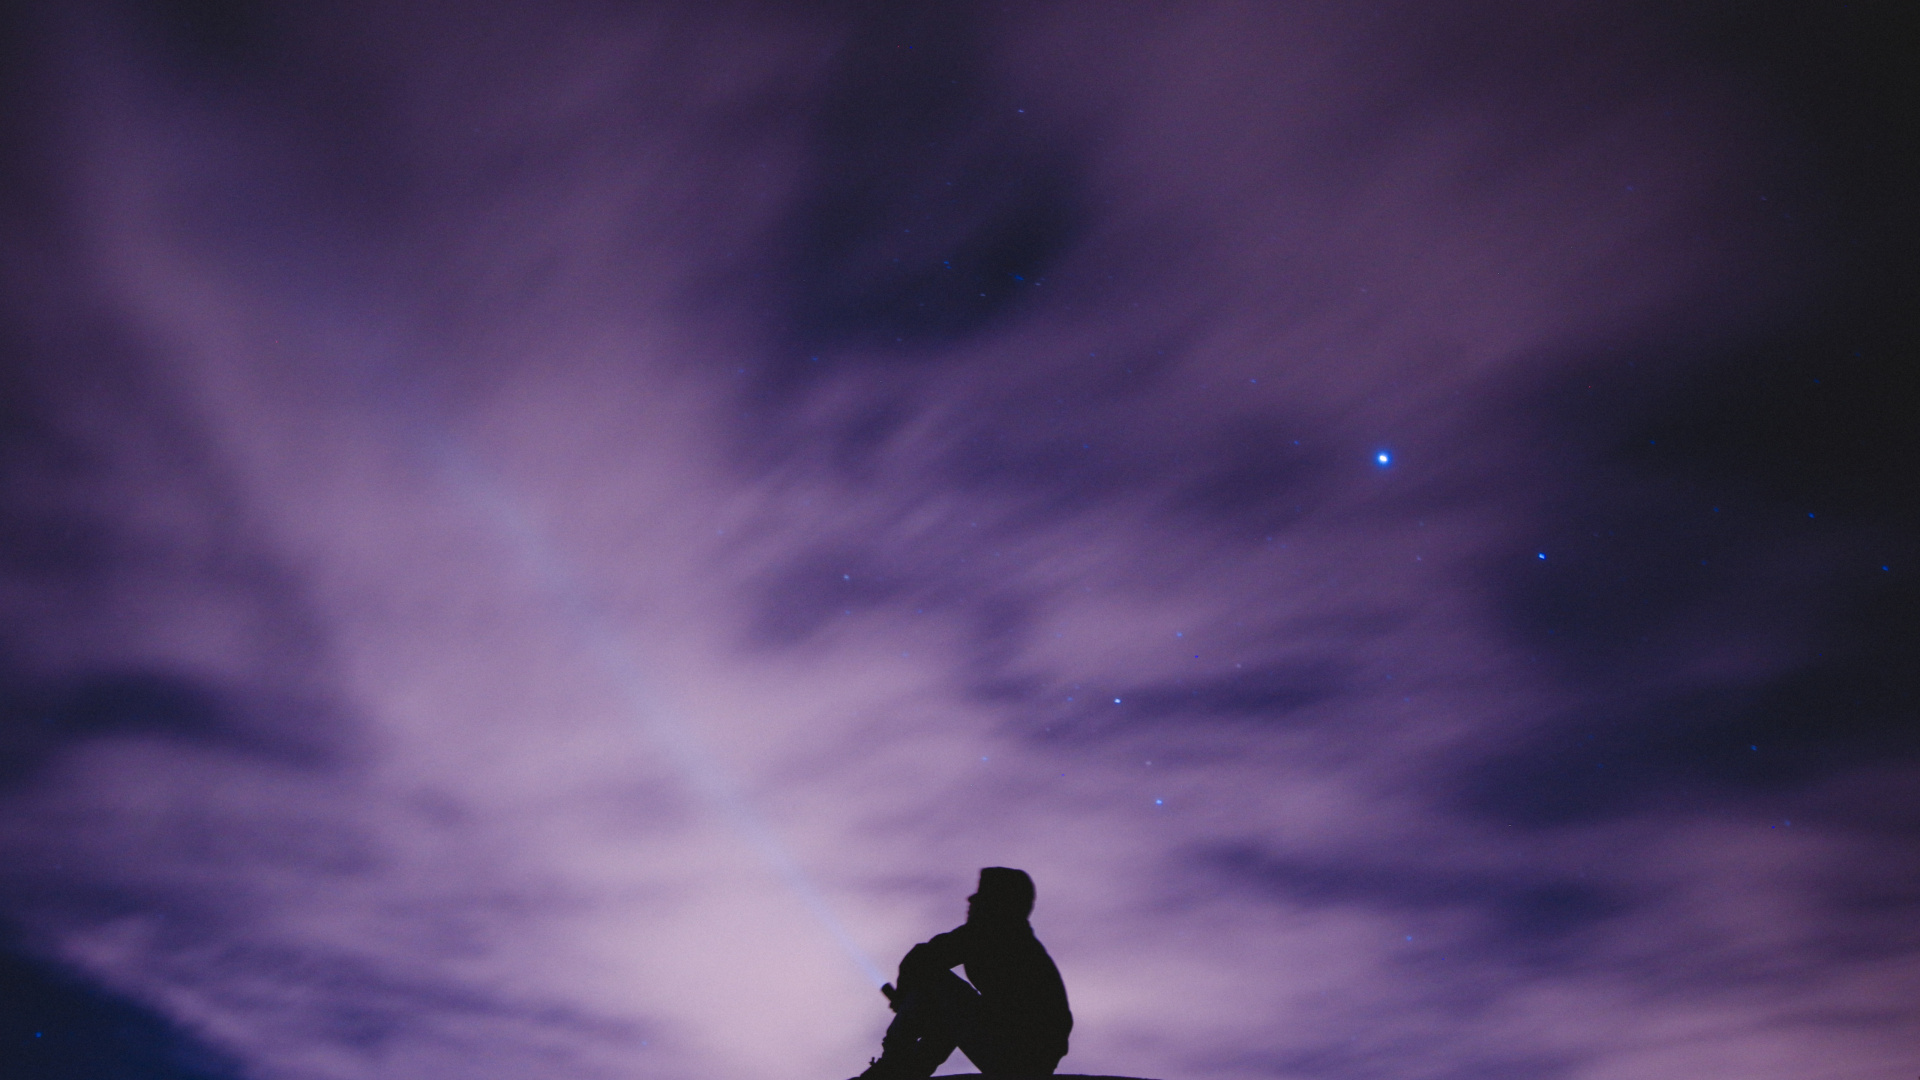 Silhouette of Man and Woman Under Dark Sky. Wallpaper in 1920x1080 Resolution